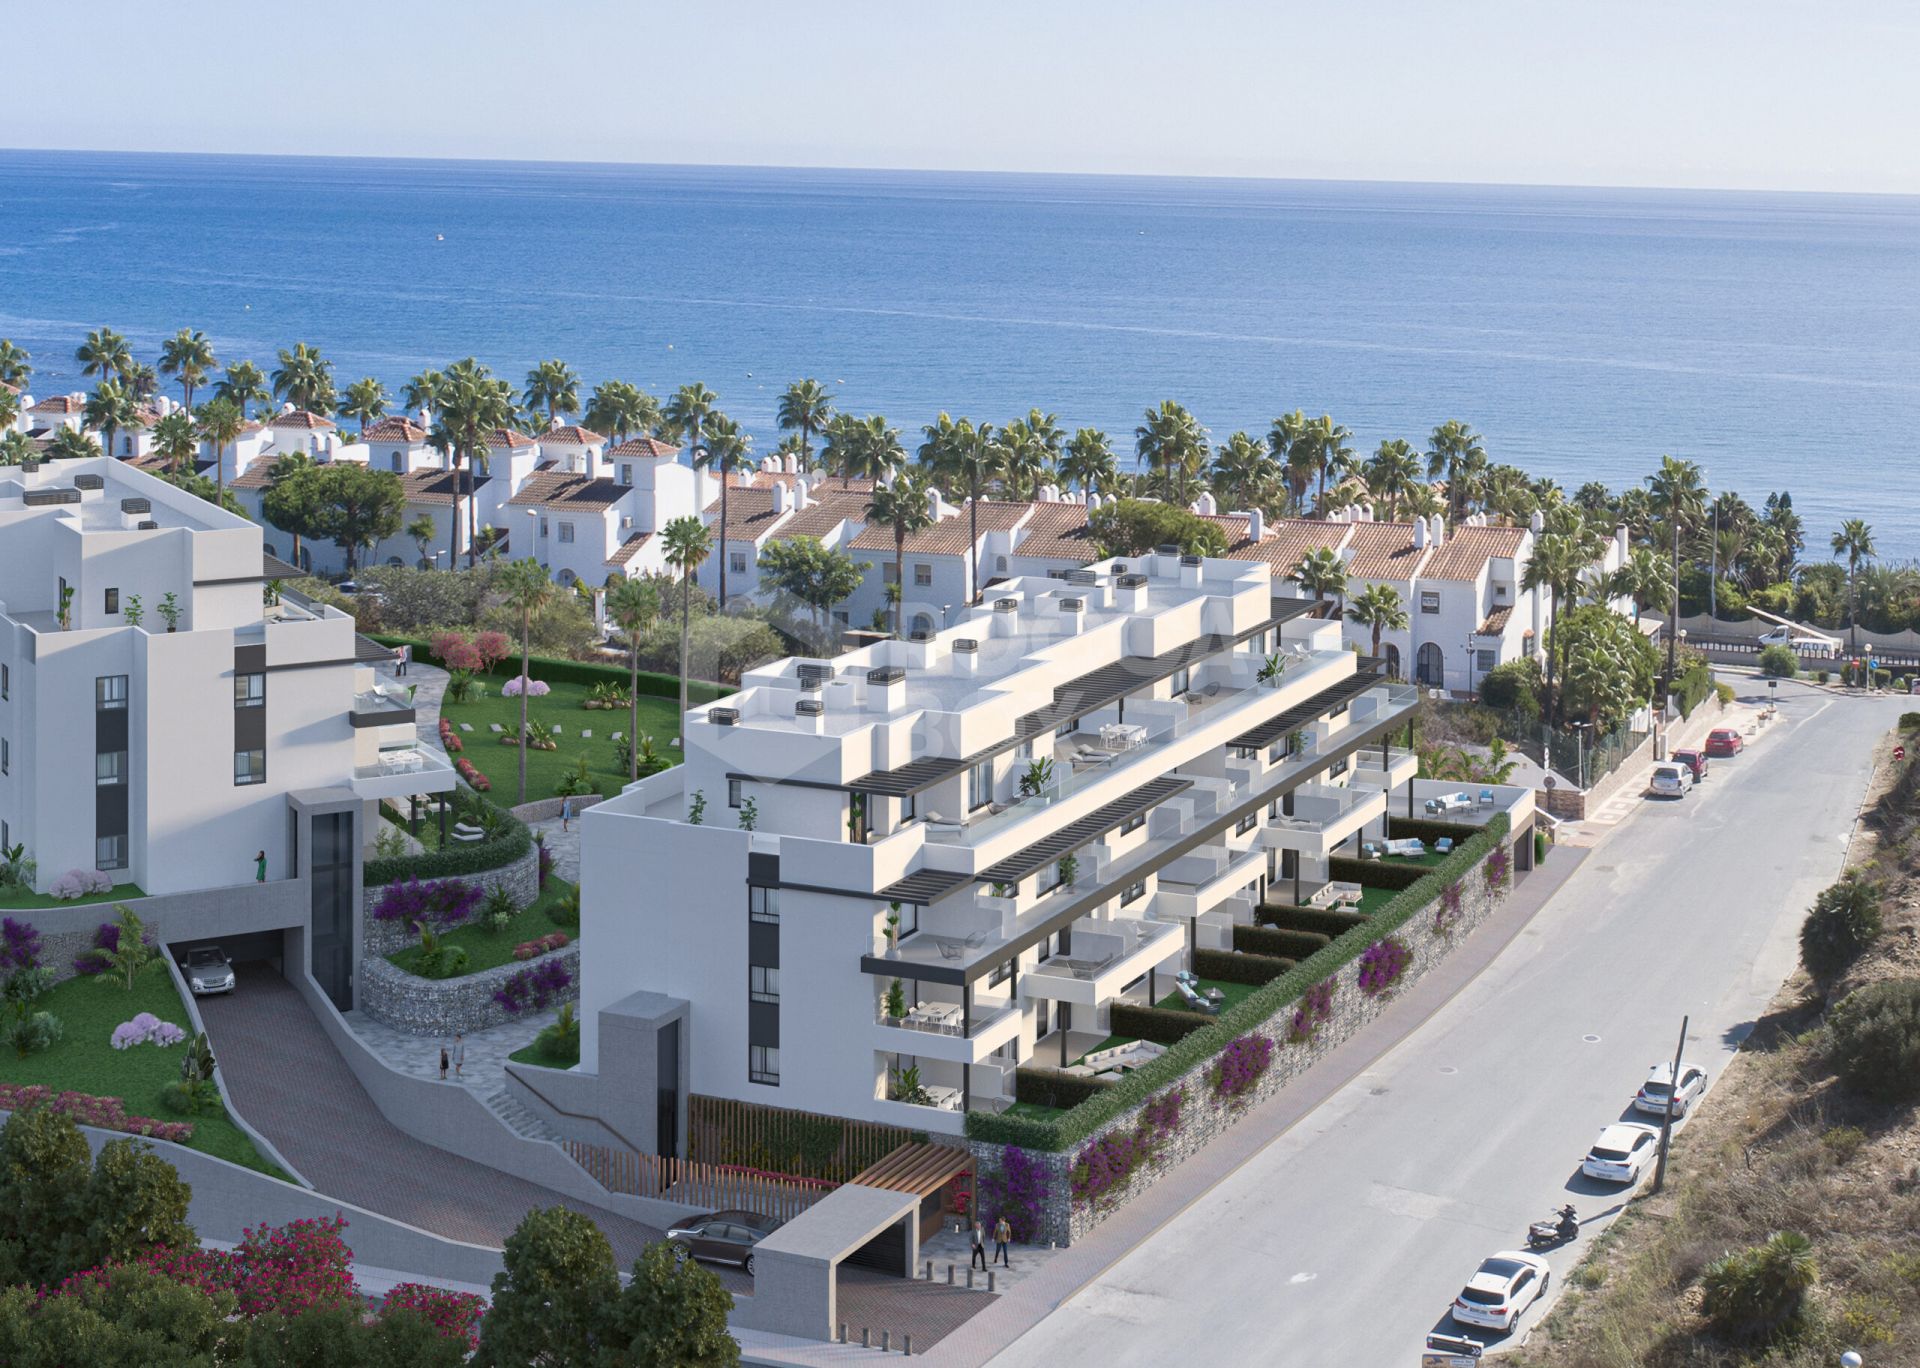 Spectacular development comprised of 2, 3 and 4 bedroom homes with sea views in a large number of them. The development has excellent garden areas, communal swimming pool, gymnasium and social-gourmet room.